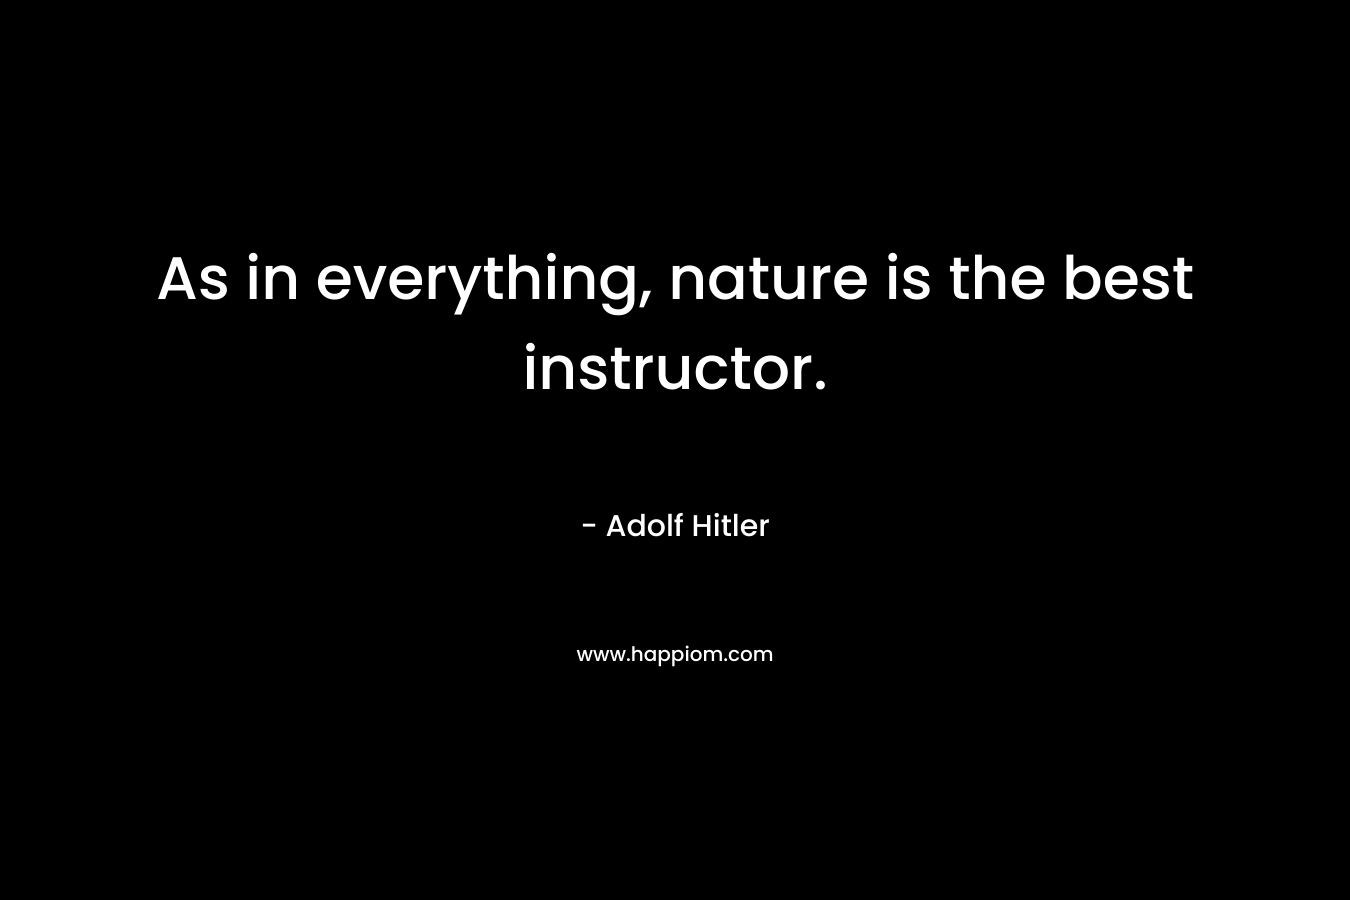 As in everything, nature is the best instructor. – Adolf Hitler